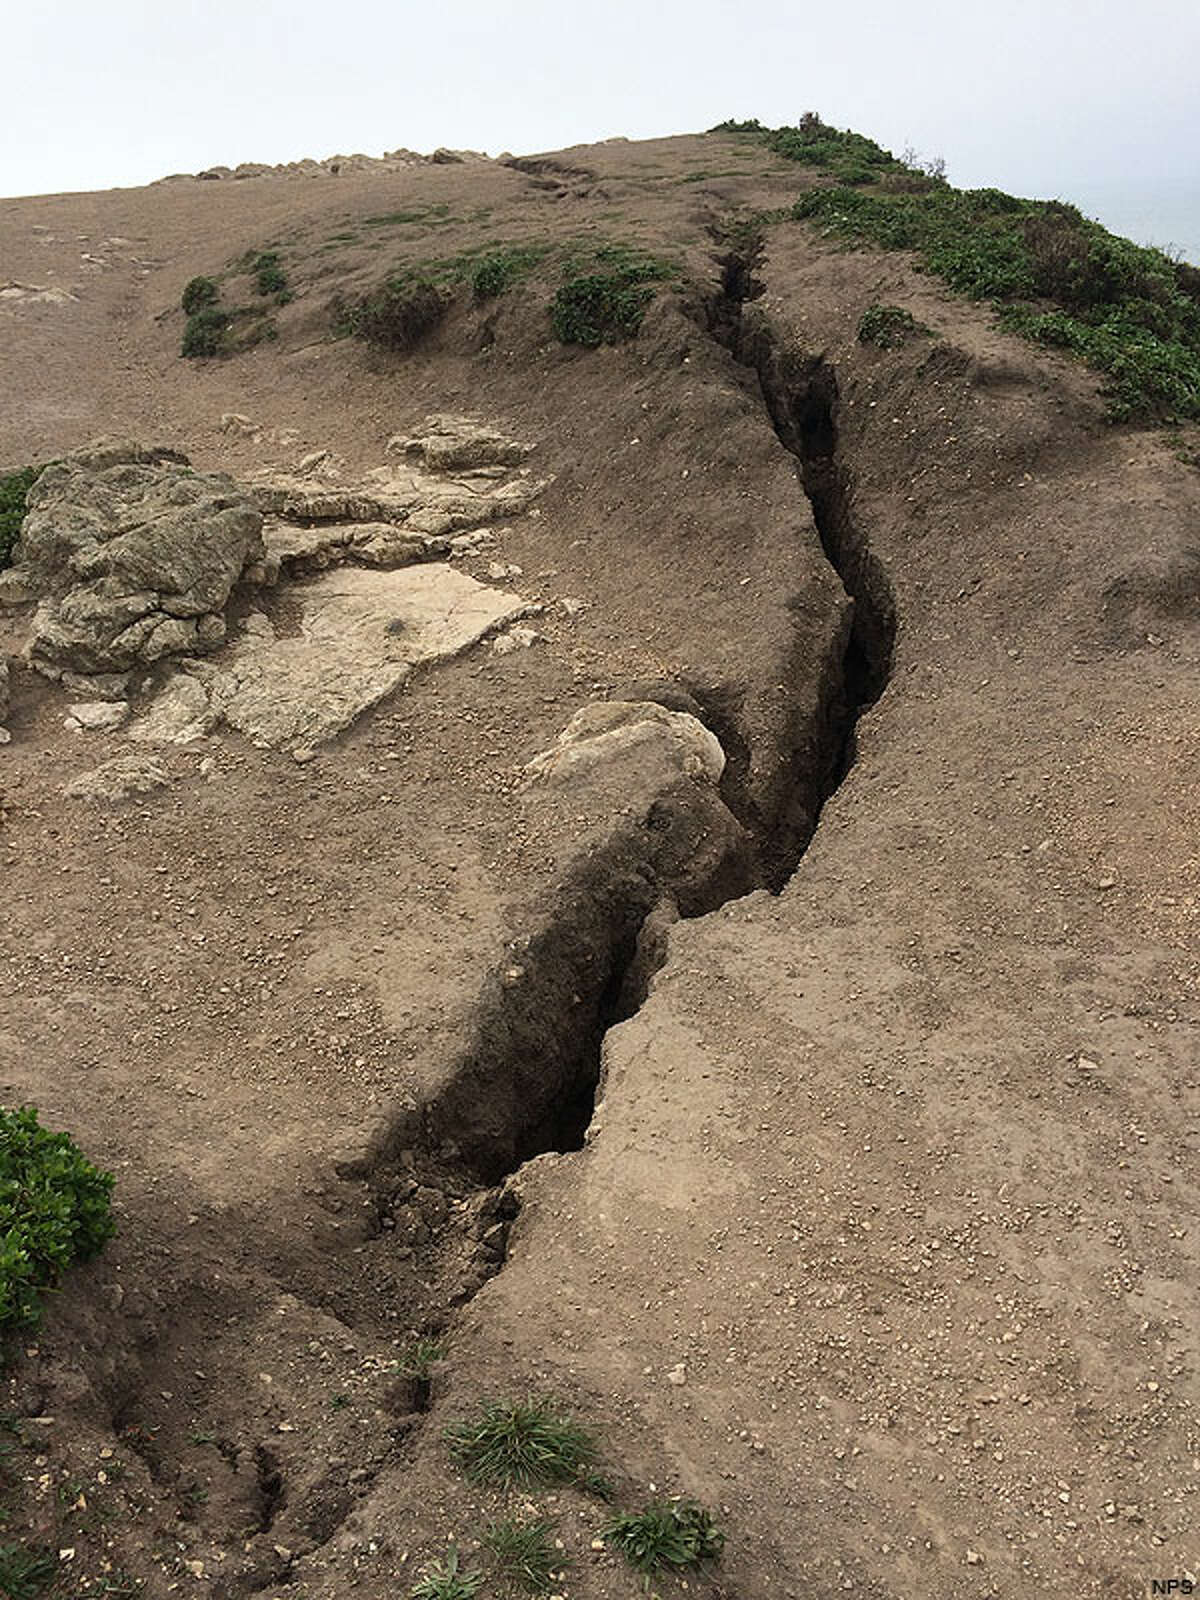 Fissures are shown in the area of Arch Rock at Point Reyes National Seashore.